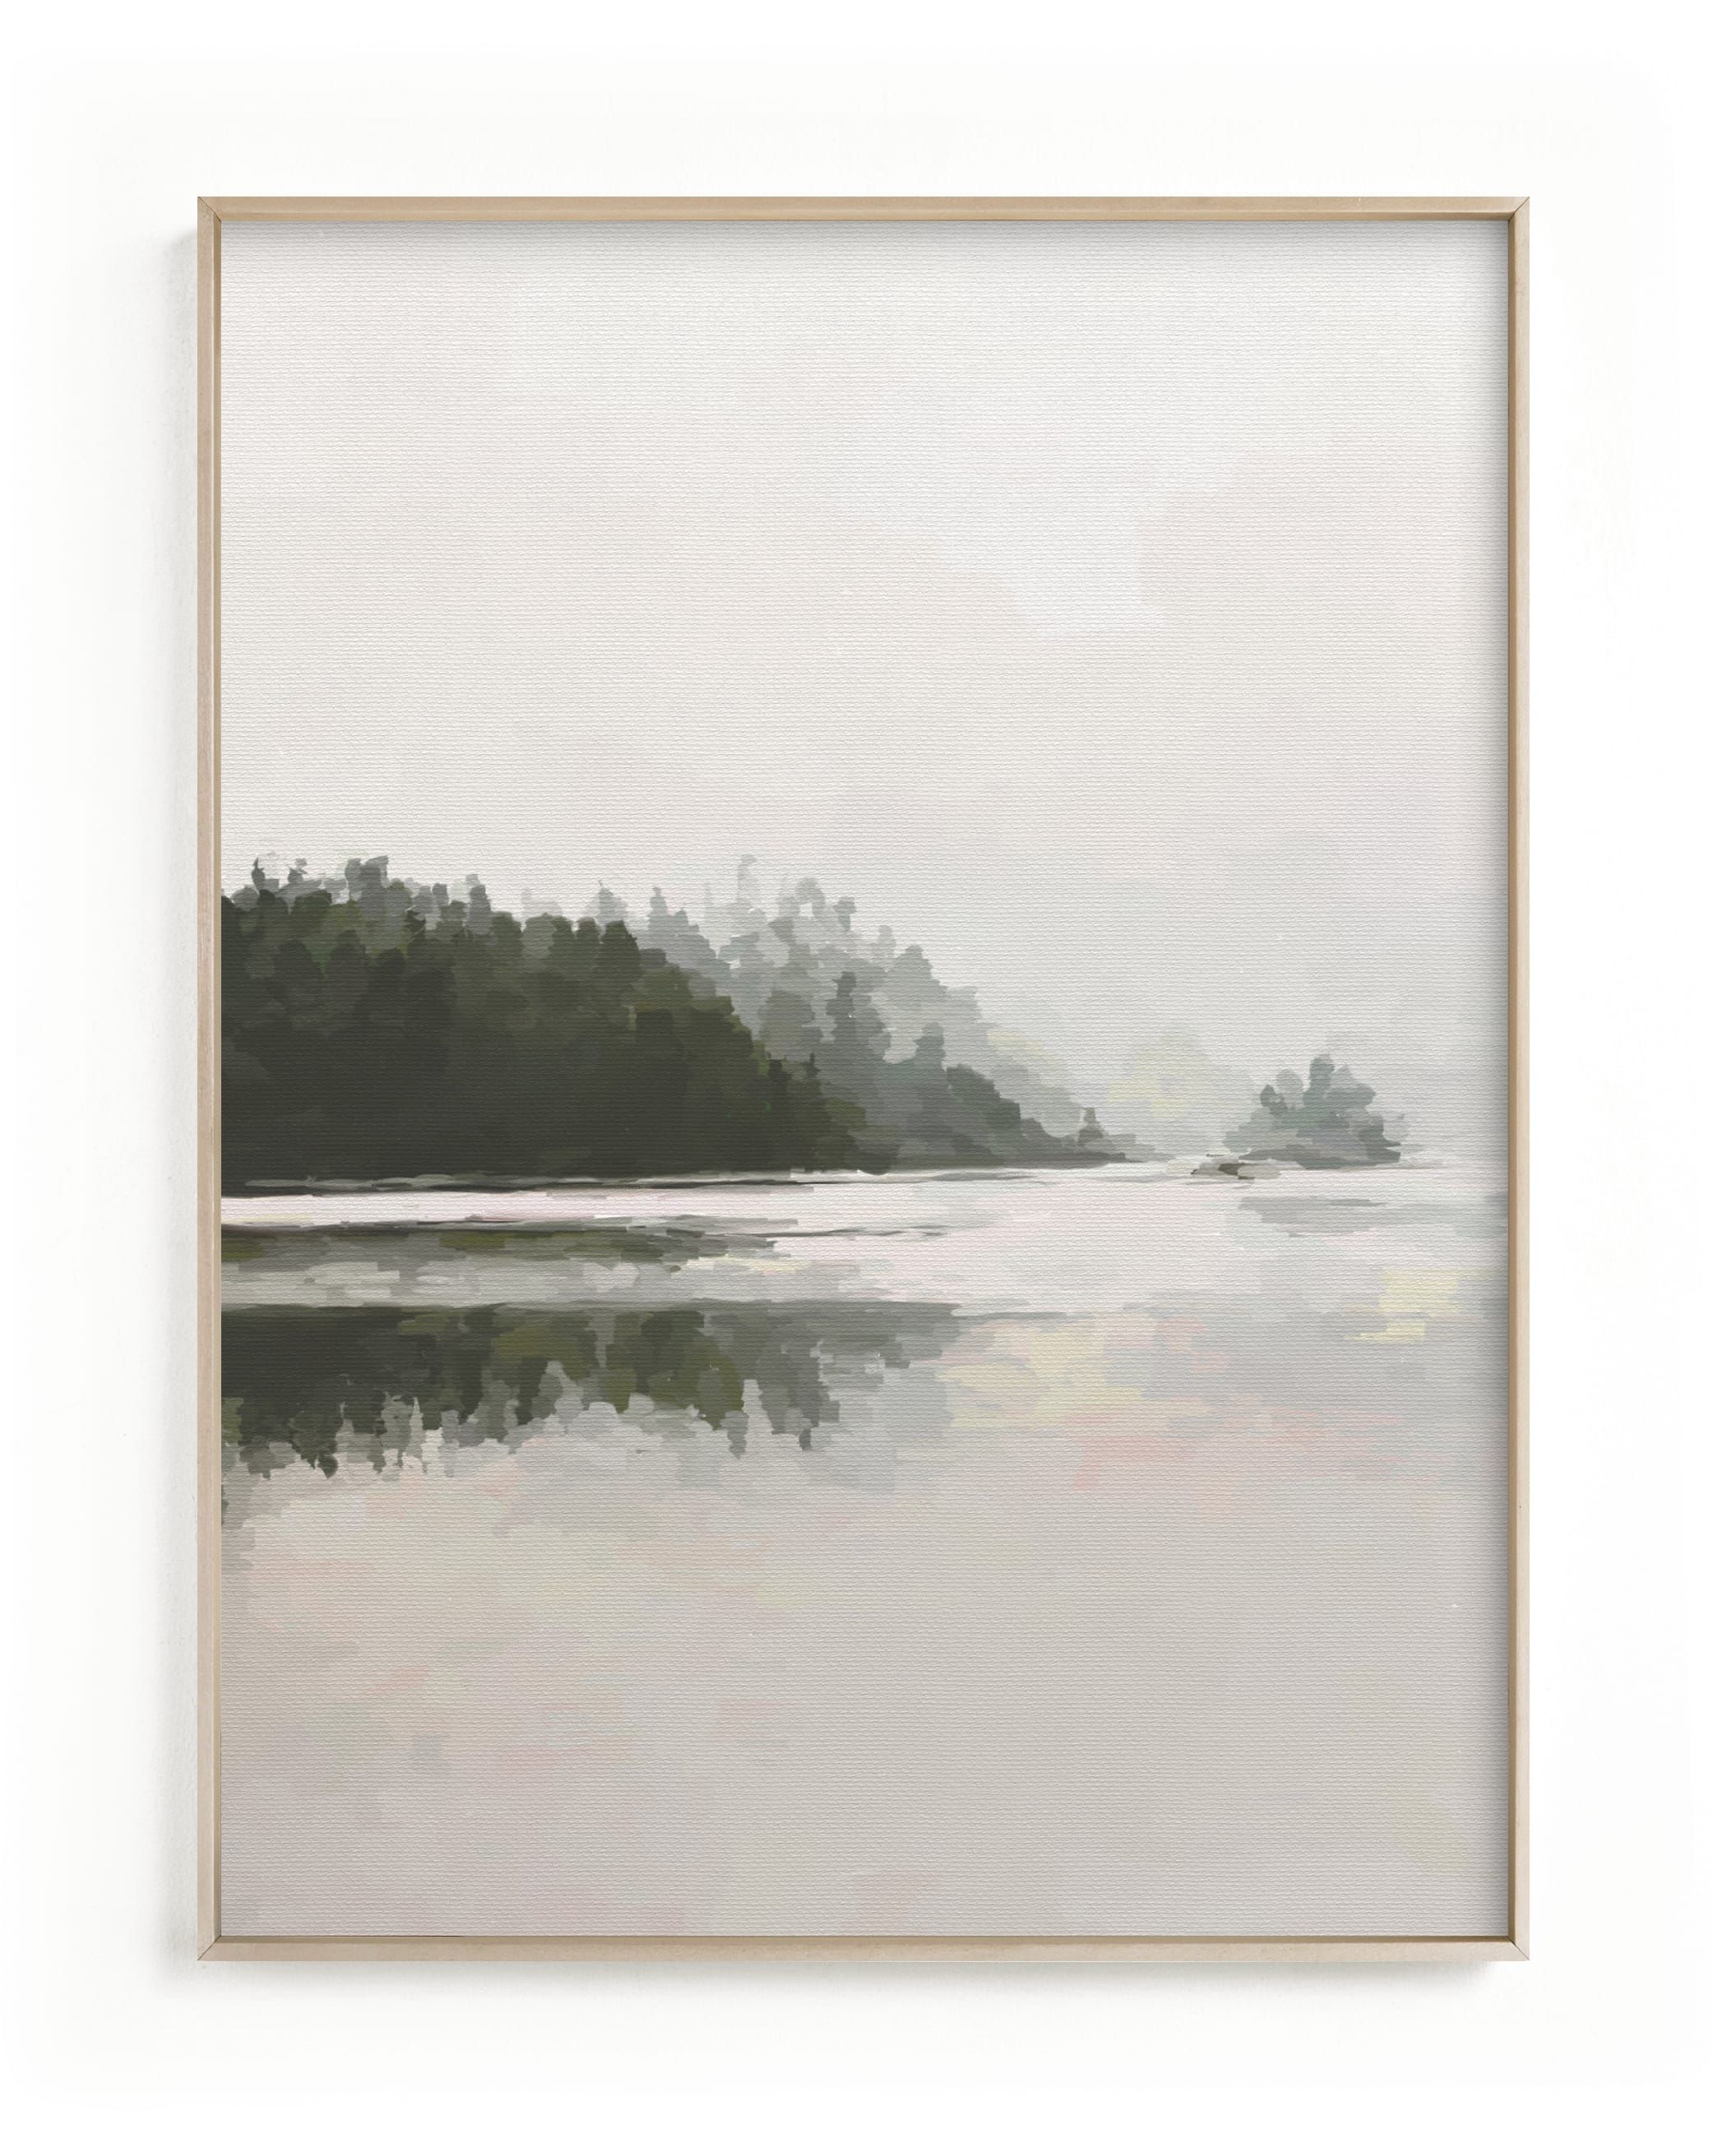 "LakeView II" - Painting Limited Edition Art Print by Amy Hall. | Minted